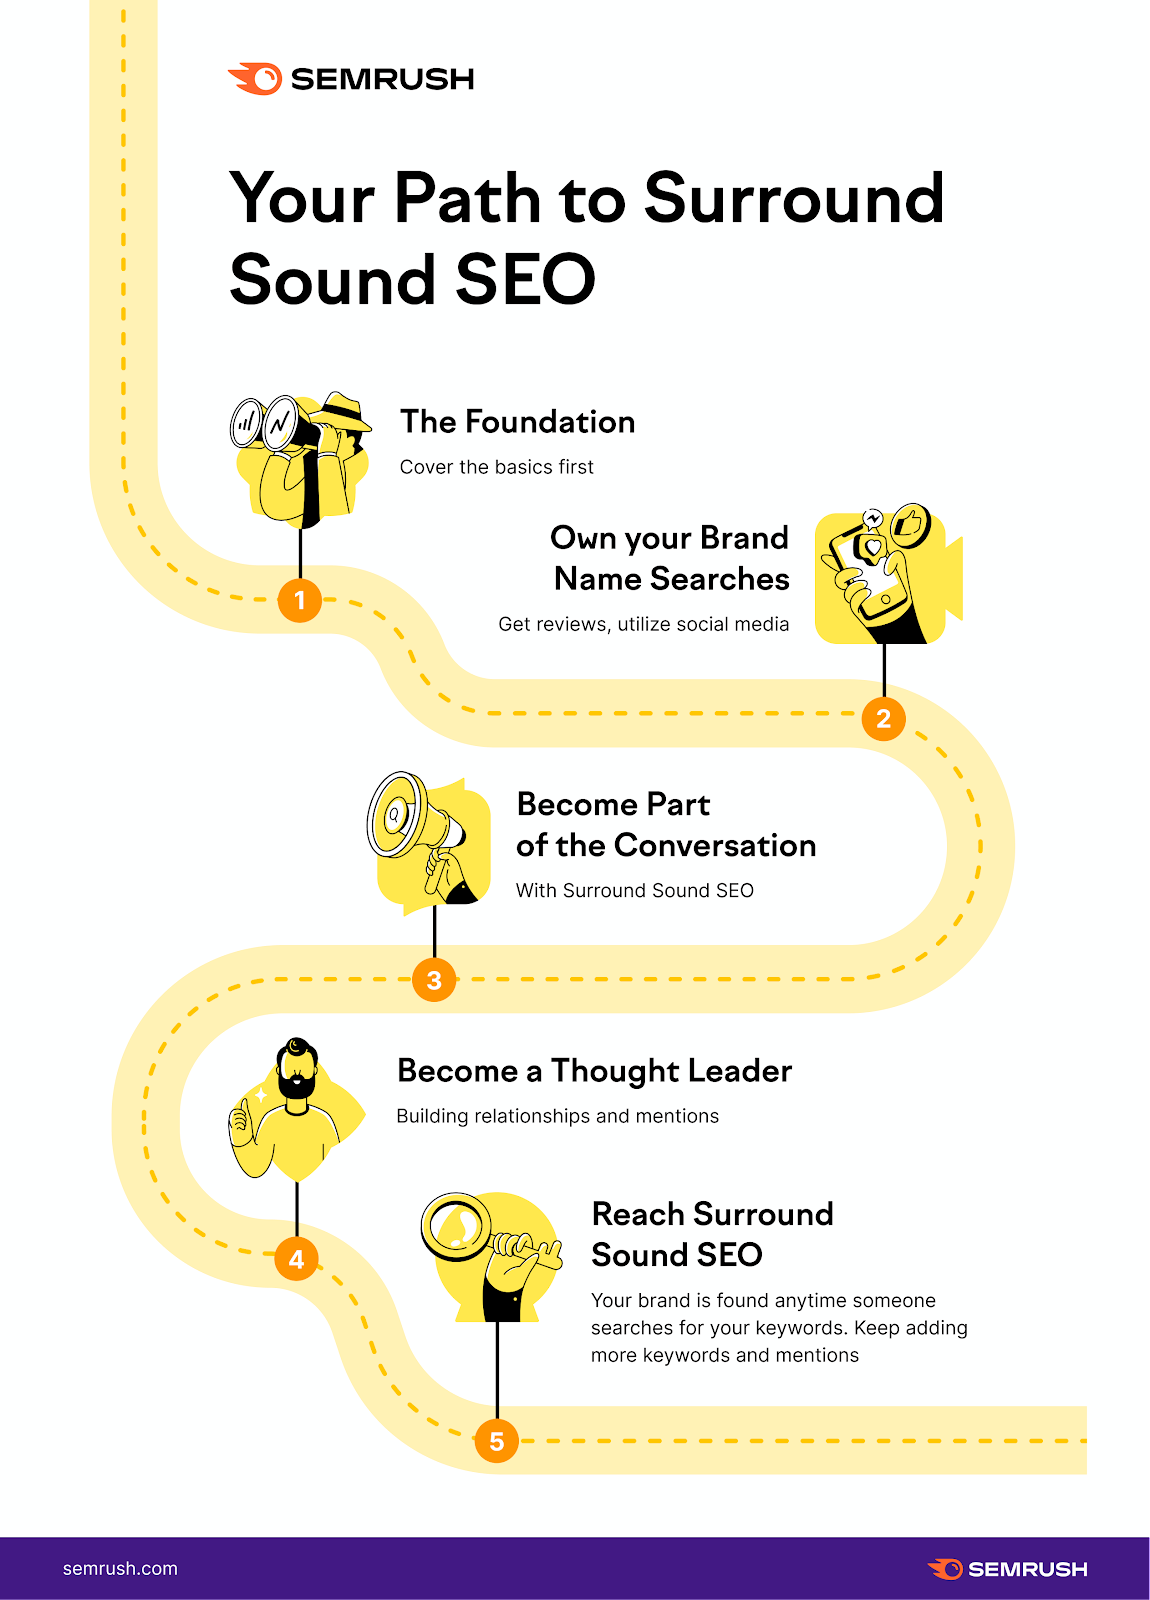 "Your Path to Surround Sound SEO" infographic by Semrush